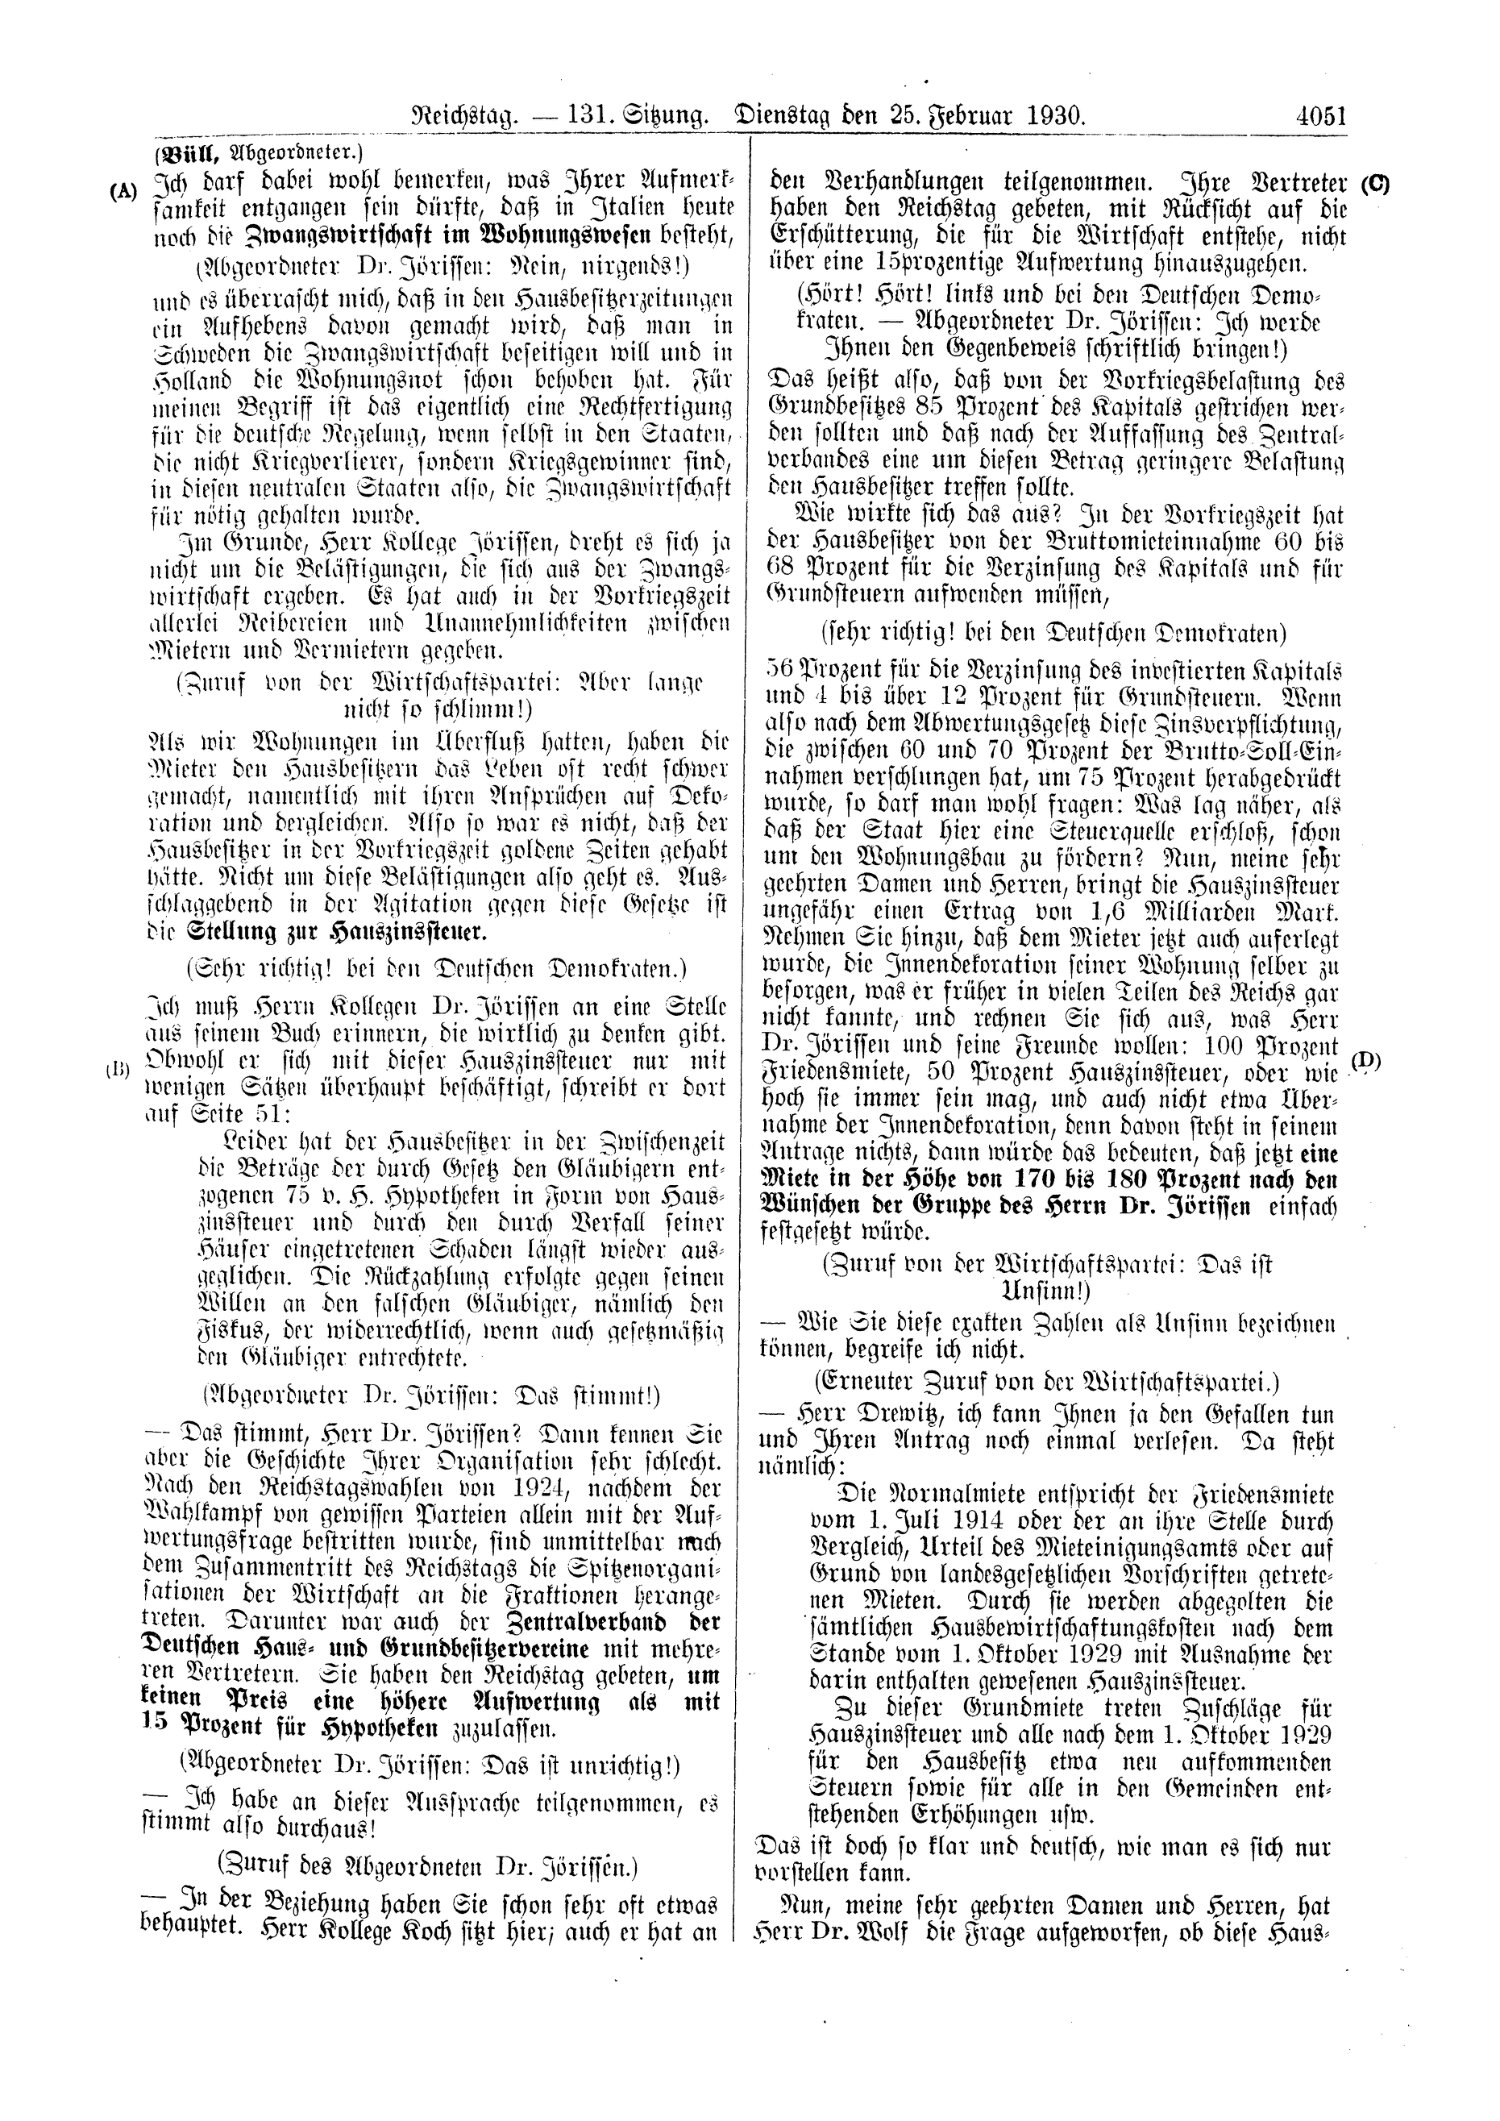 Scan of page 4051